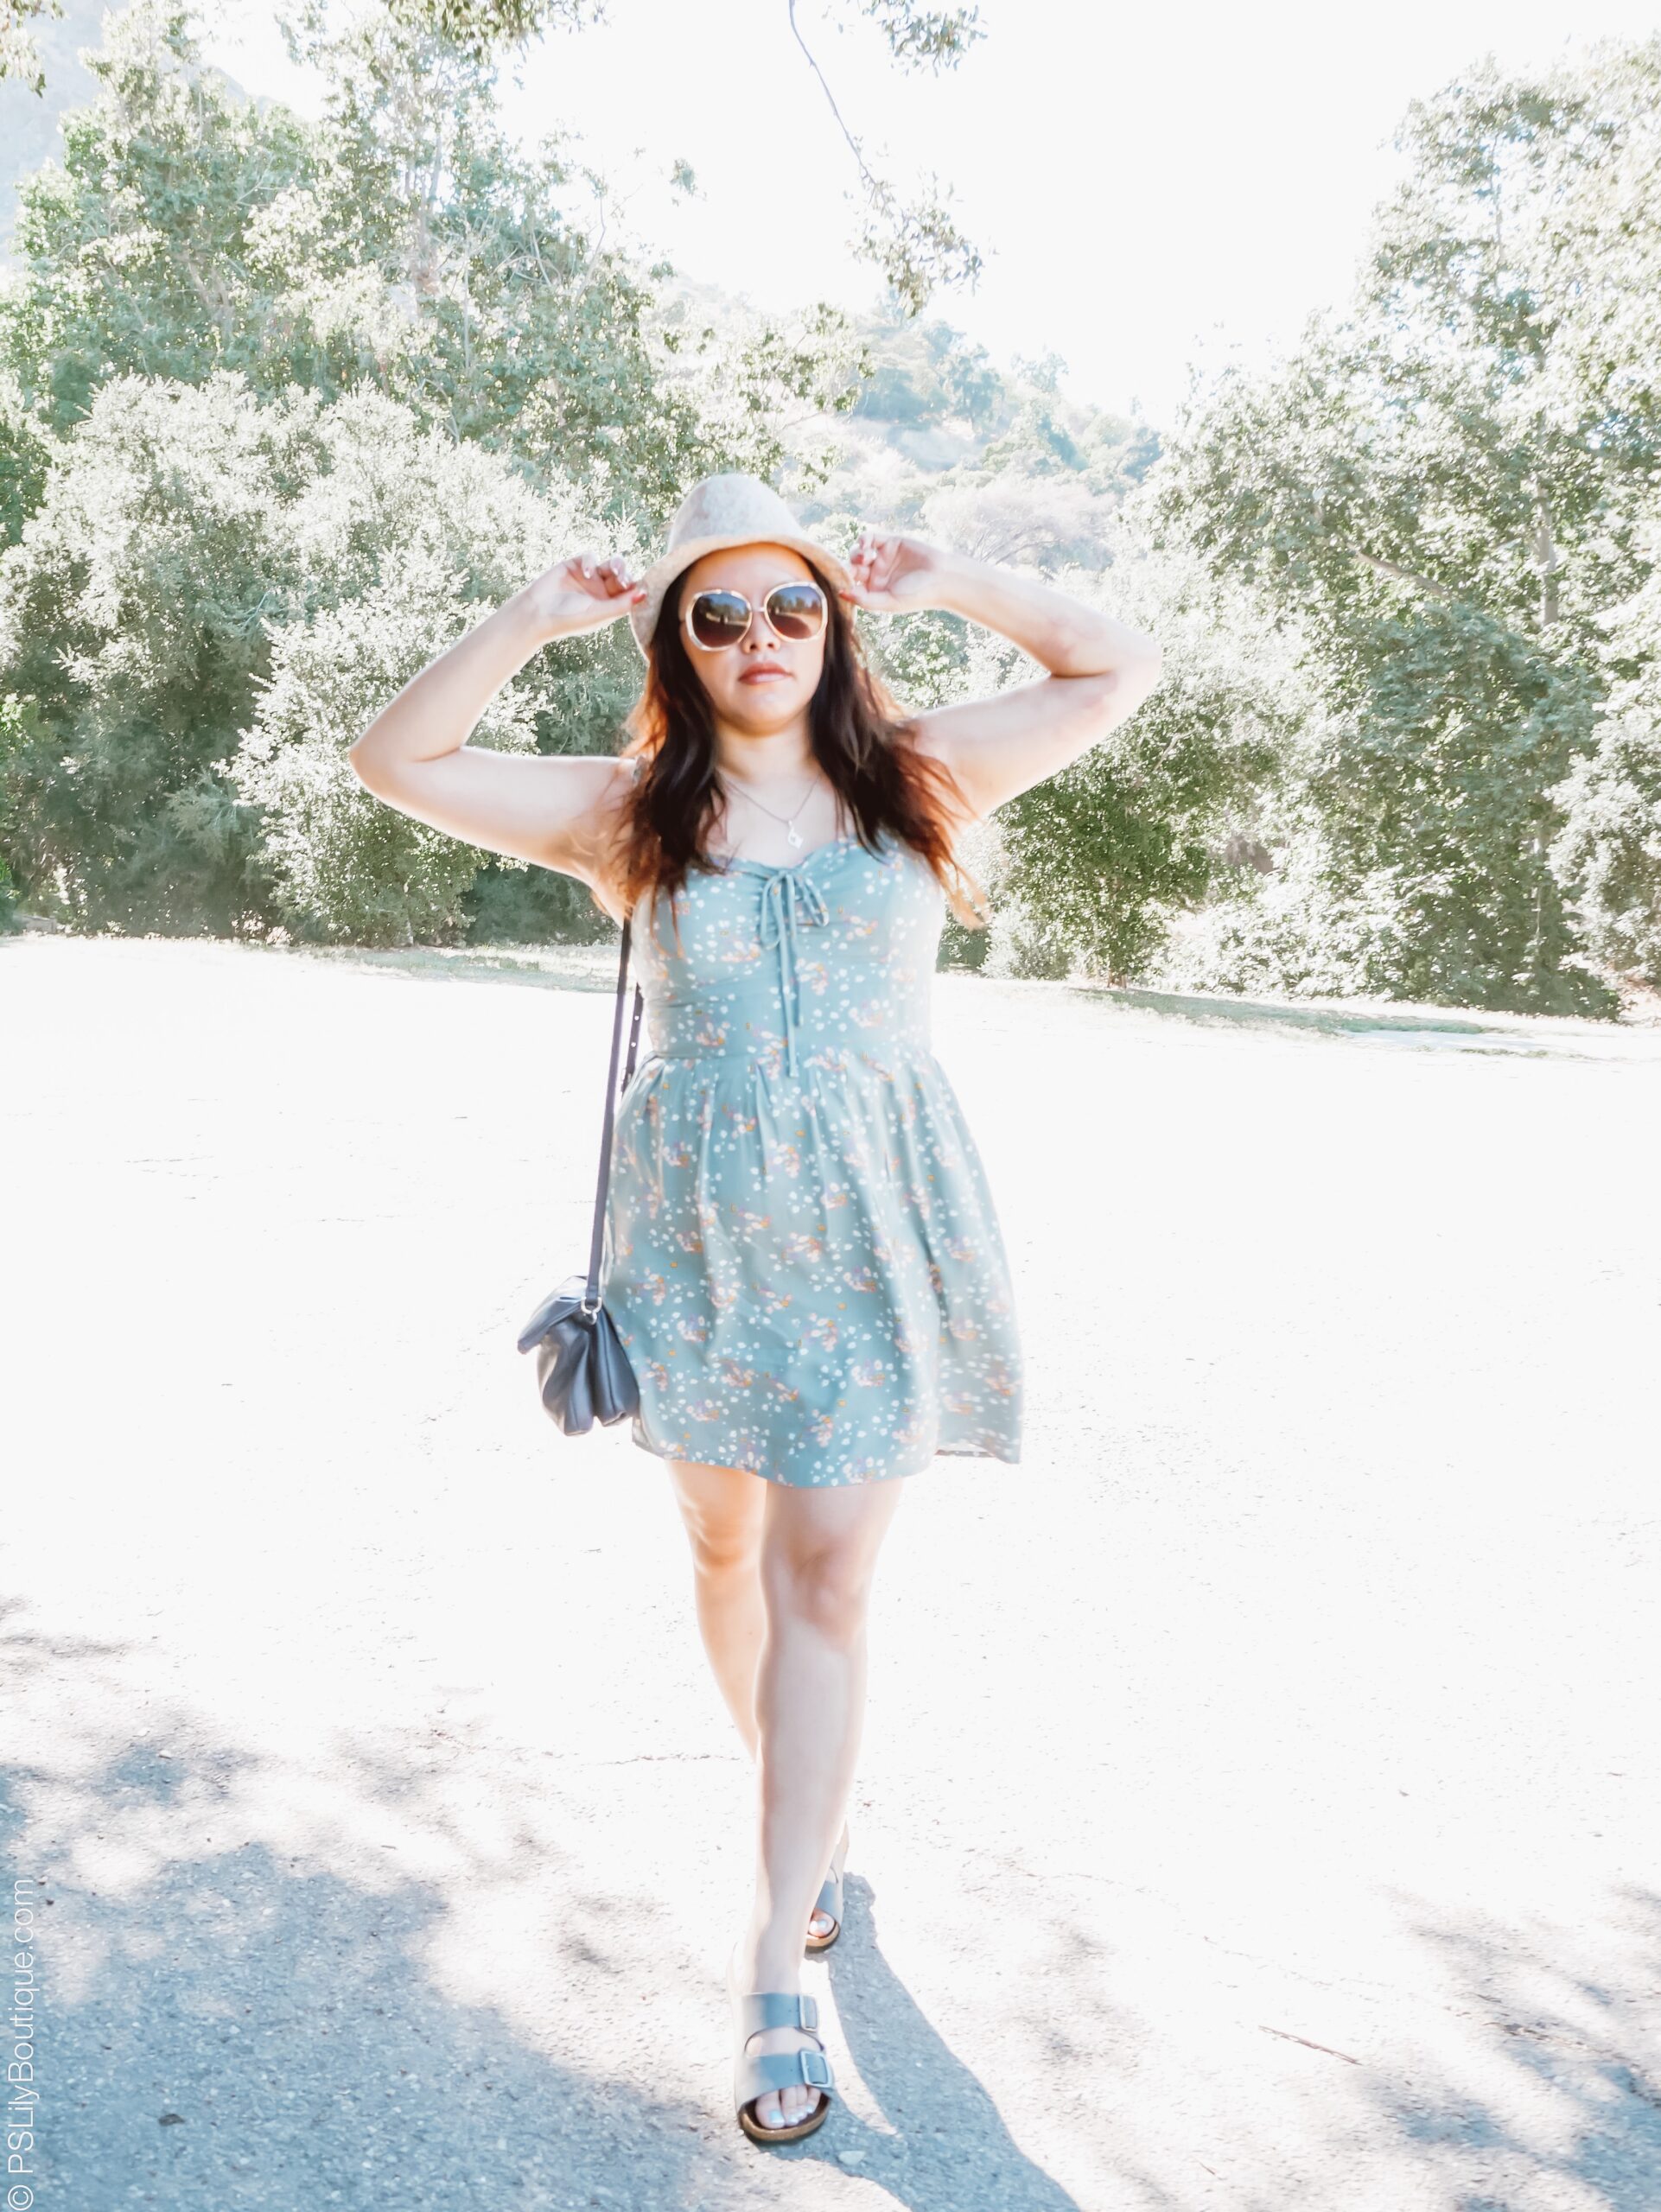 Fourth-Of-July-PSLilyBoutique-los-angeles-fashion-blogger-gray-birkenstock-leather-buckle-sandals-fourth-of-july-Griffith_Park-light-green-reformation-floral-cami-dress-summer-2019-outfit-ideas-hair-and-makeup-street-style-2019-6, Instagram: @pslilyboutique, Pinterest, Los Angeles fashion blogger, top fashion blog, best fashion blog, fashion & personal style blog, travel blog, lifestyle blogger, travel blogger, LA fashion blogger, chicago based fashion blogger, fashion influencer, luxury fashion, luxury travel, luxury influencer, luxury lifestyle, lifestyle blog